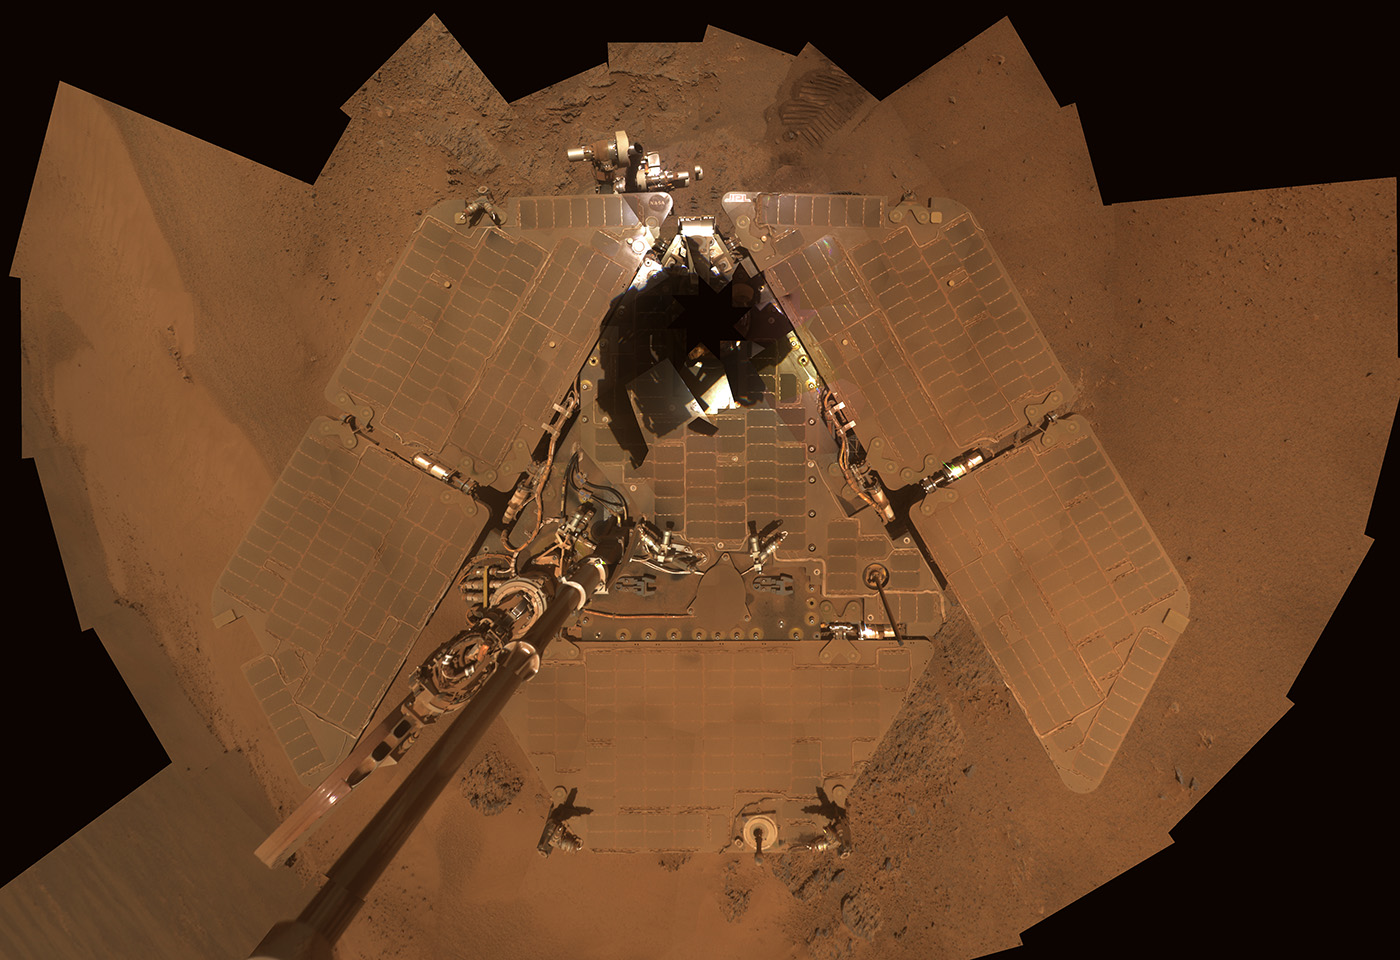 NASA's Opportunity Rover Mission on Mars Comes to End